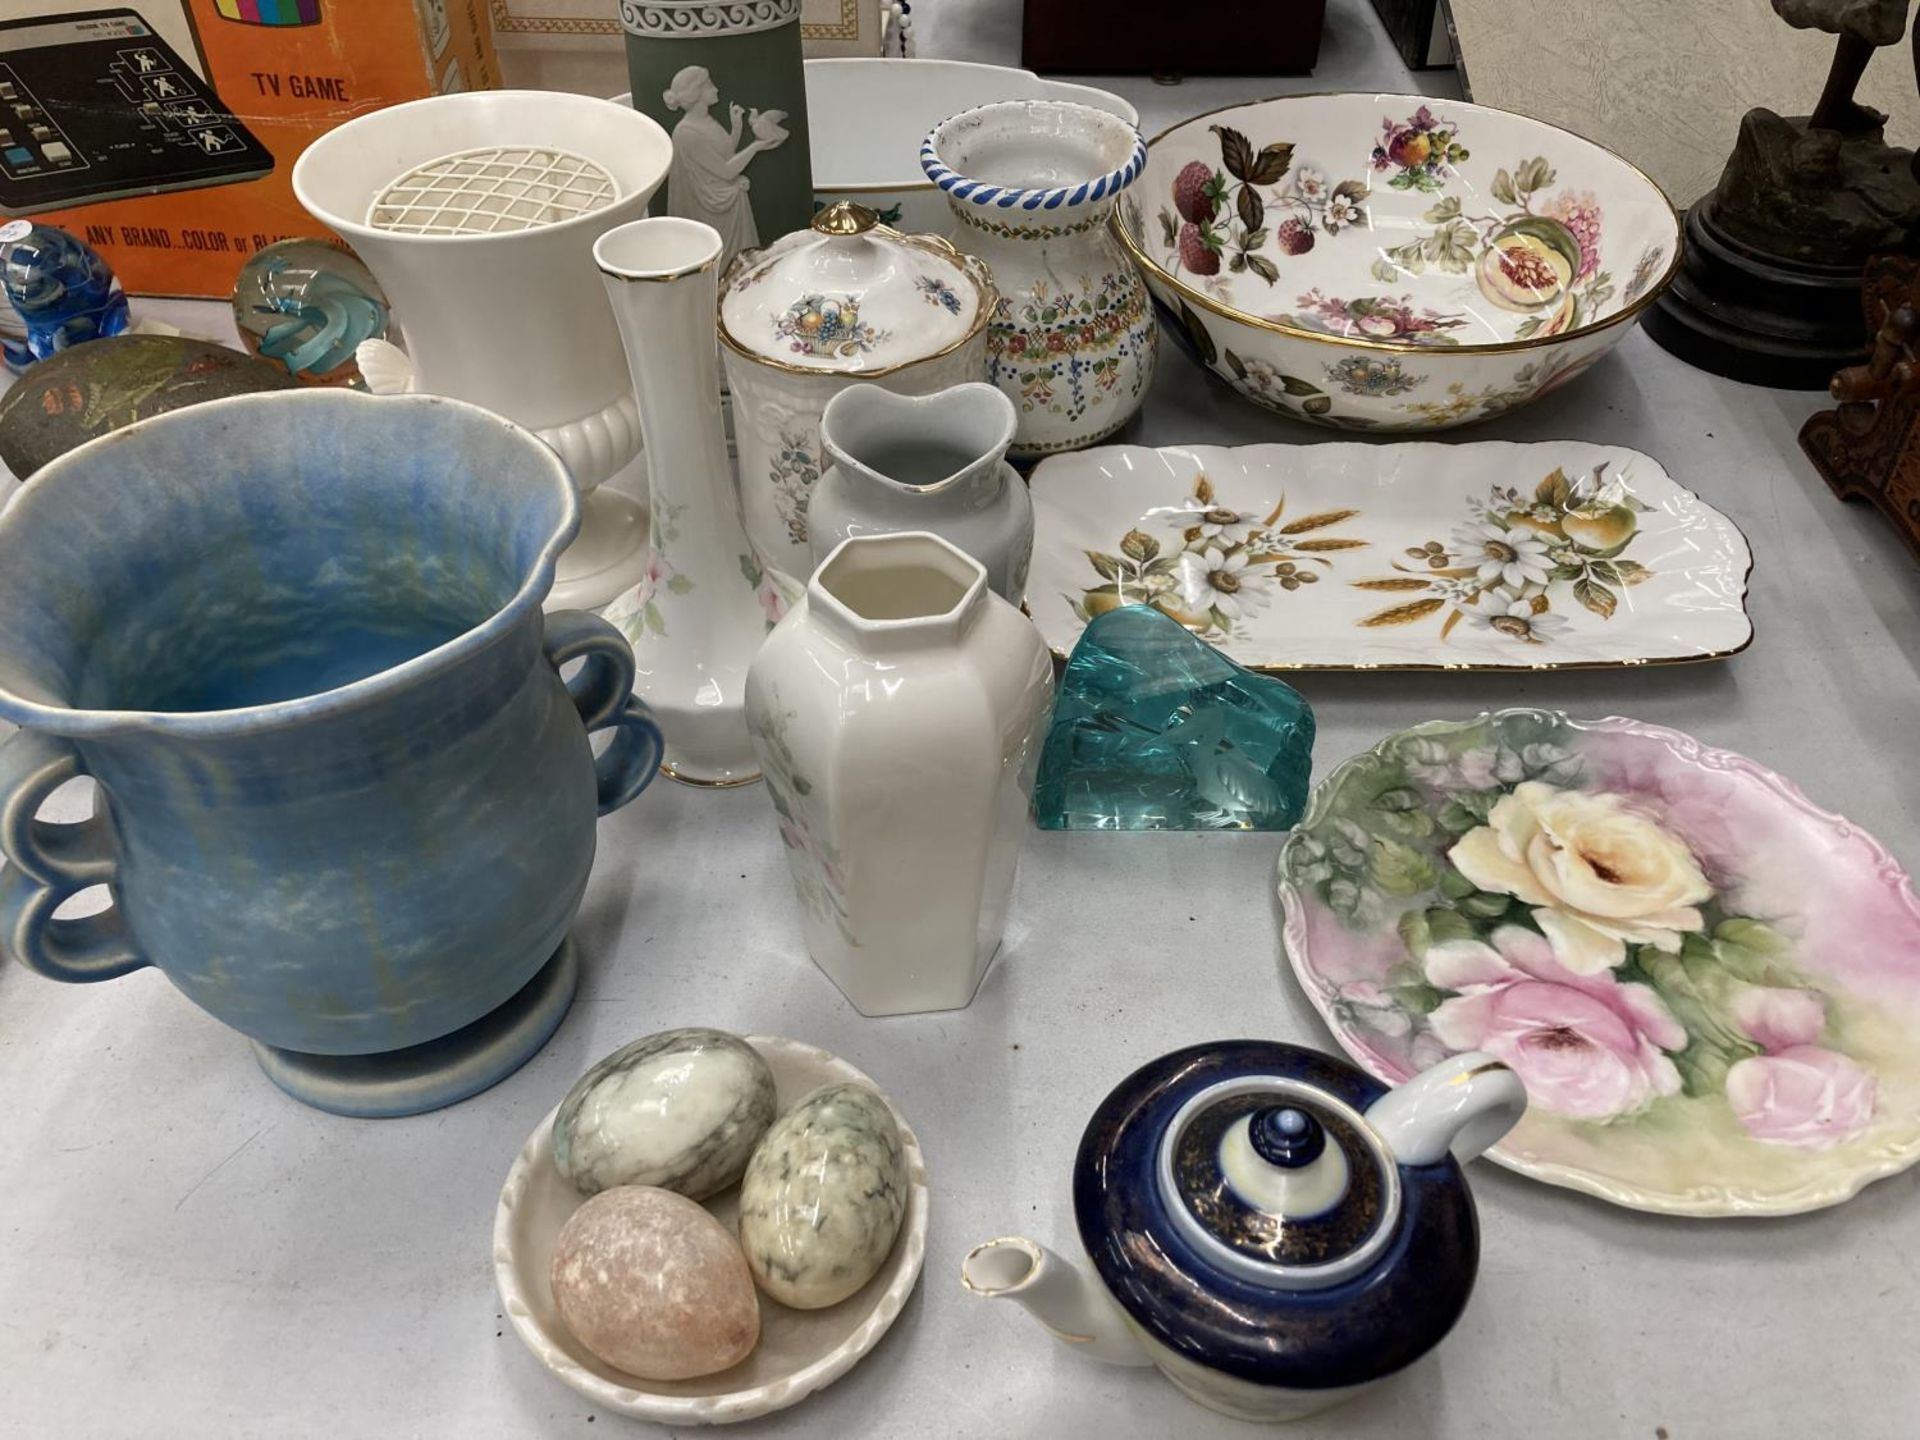 A QUANTITY OF CERAMIC AND CHINA TO INCLUDE BOWLS, VASES, EGGS, A PLANTER, ETC PLUS A PIECE OF SIGNED - Image 2 of 4